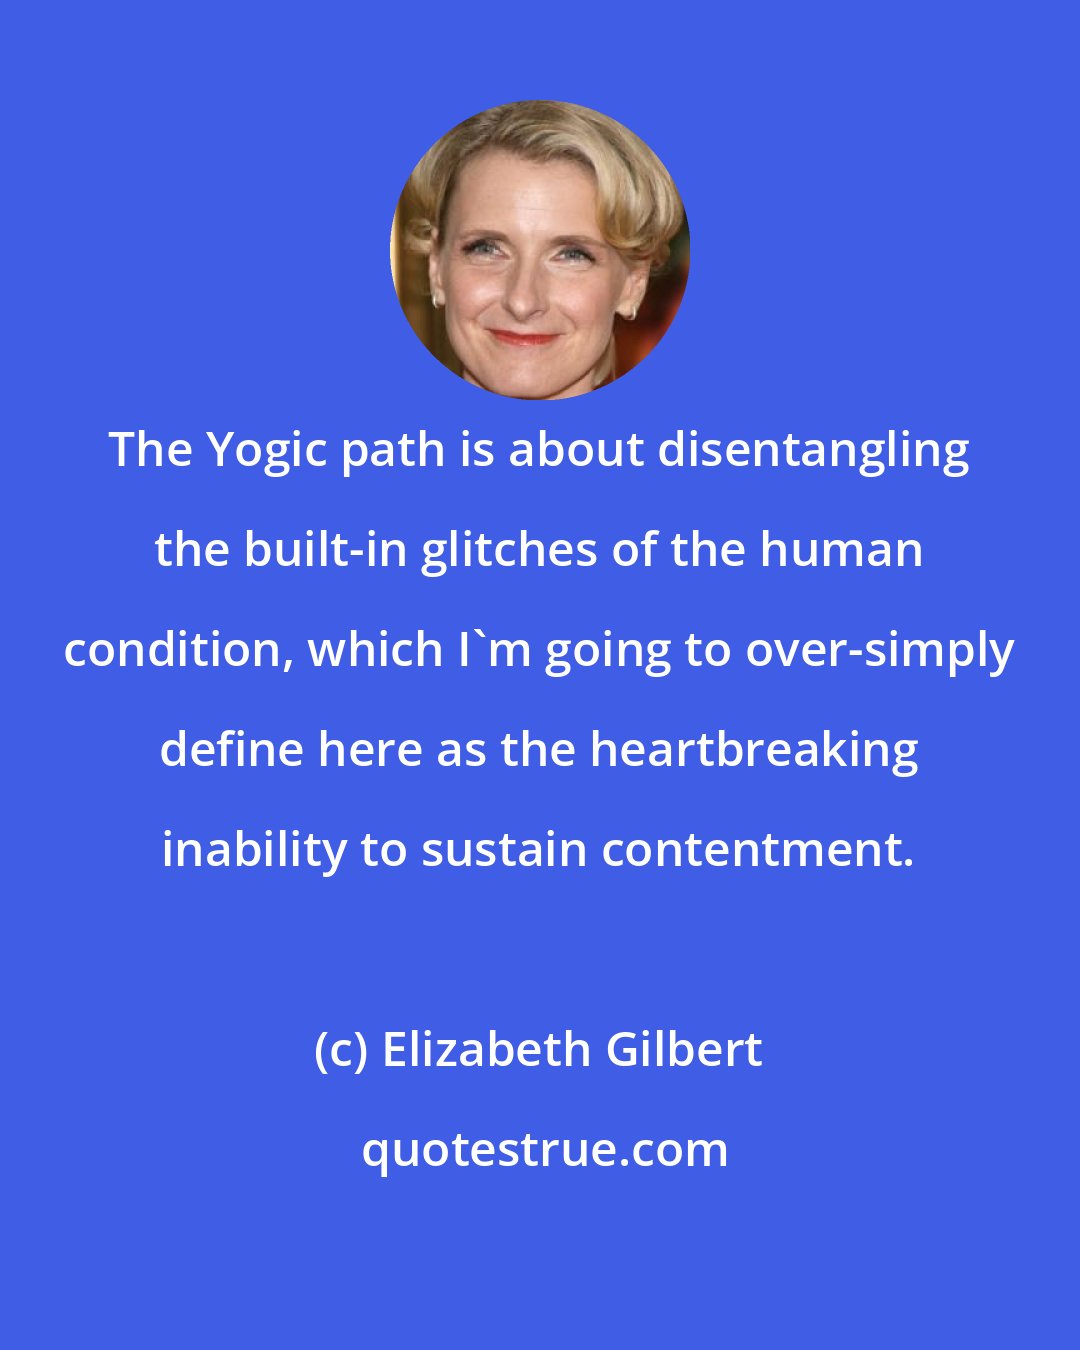 Elizabeth Gilbert: The Yogic path is about disentangling the built-in glitches of the human condition, which I'm going to over-simply define here as the heartbreaking inability to sustain contentment.